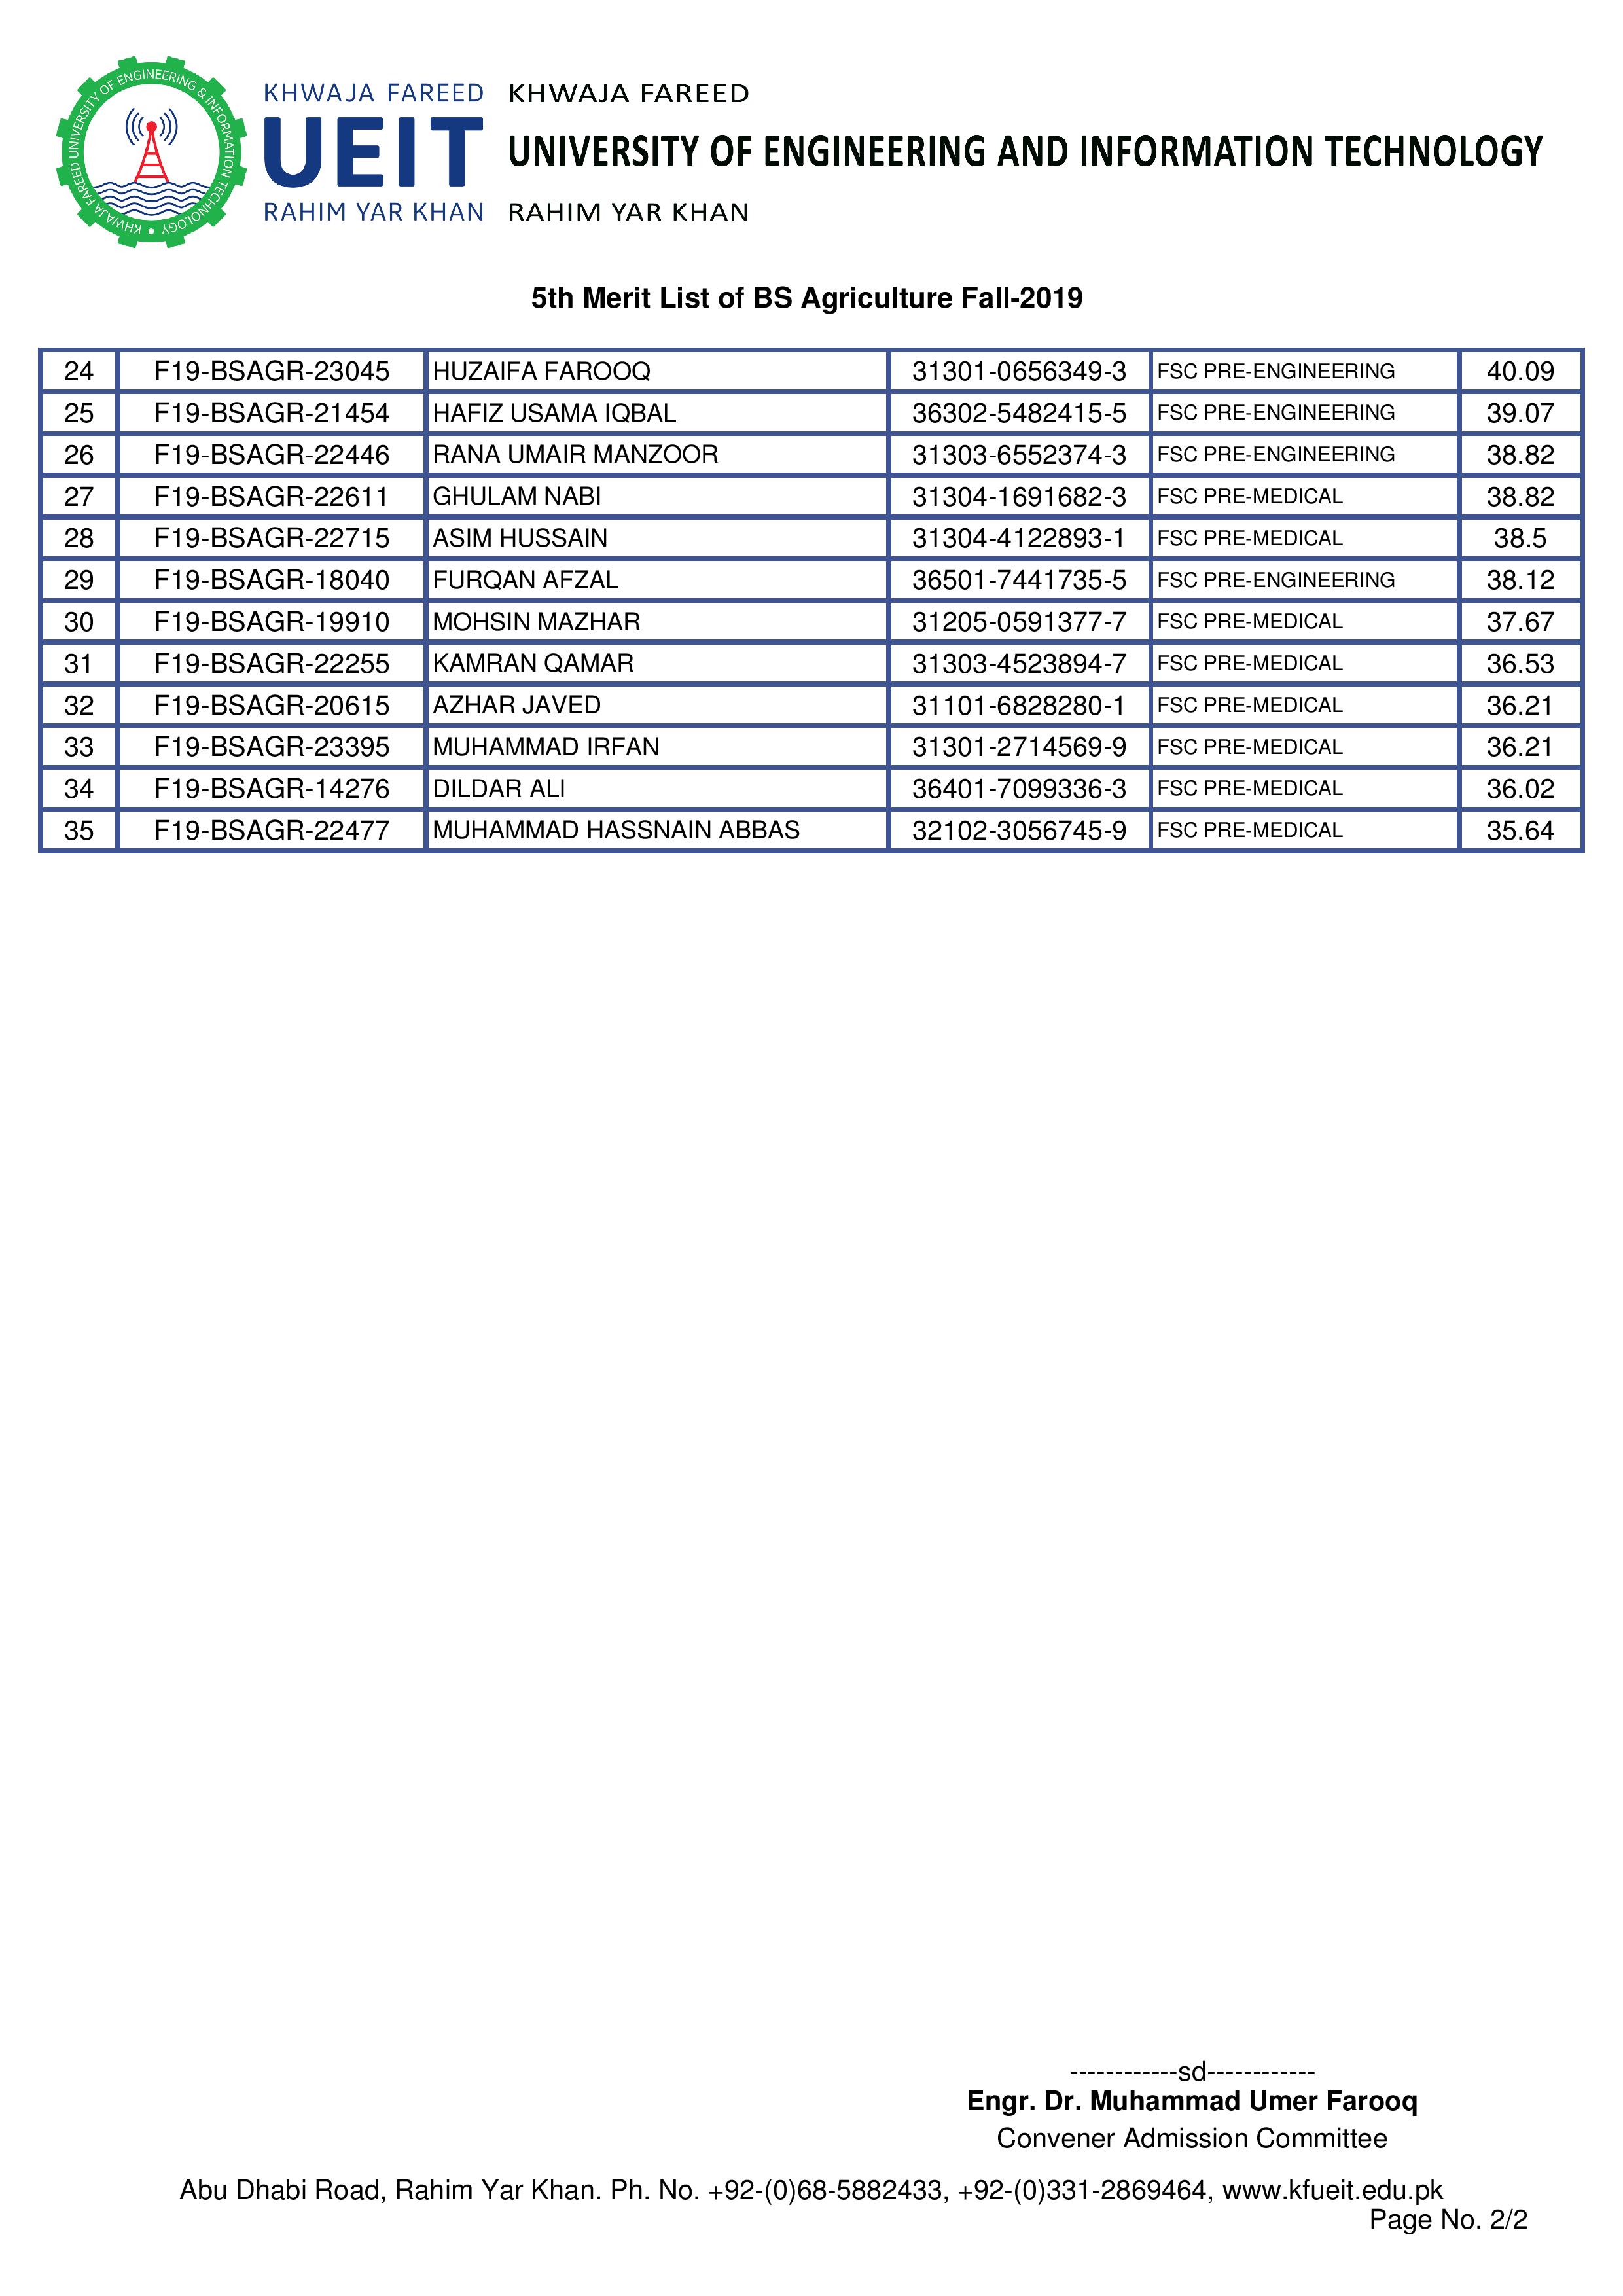 5th Merit List of BS Agriculture Fall-2019-page-002